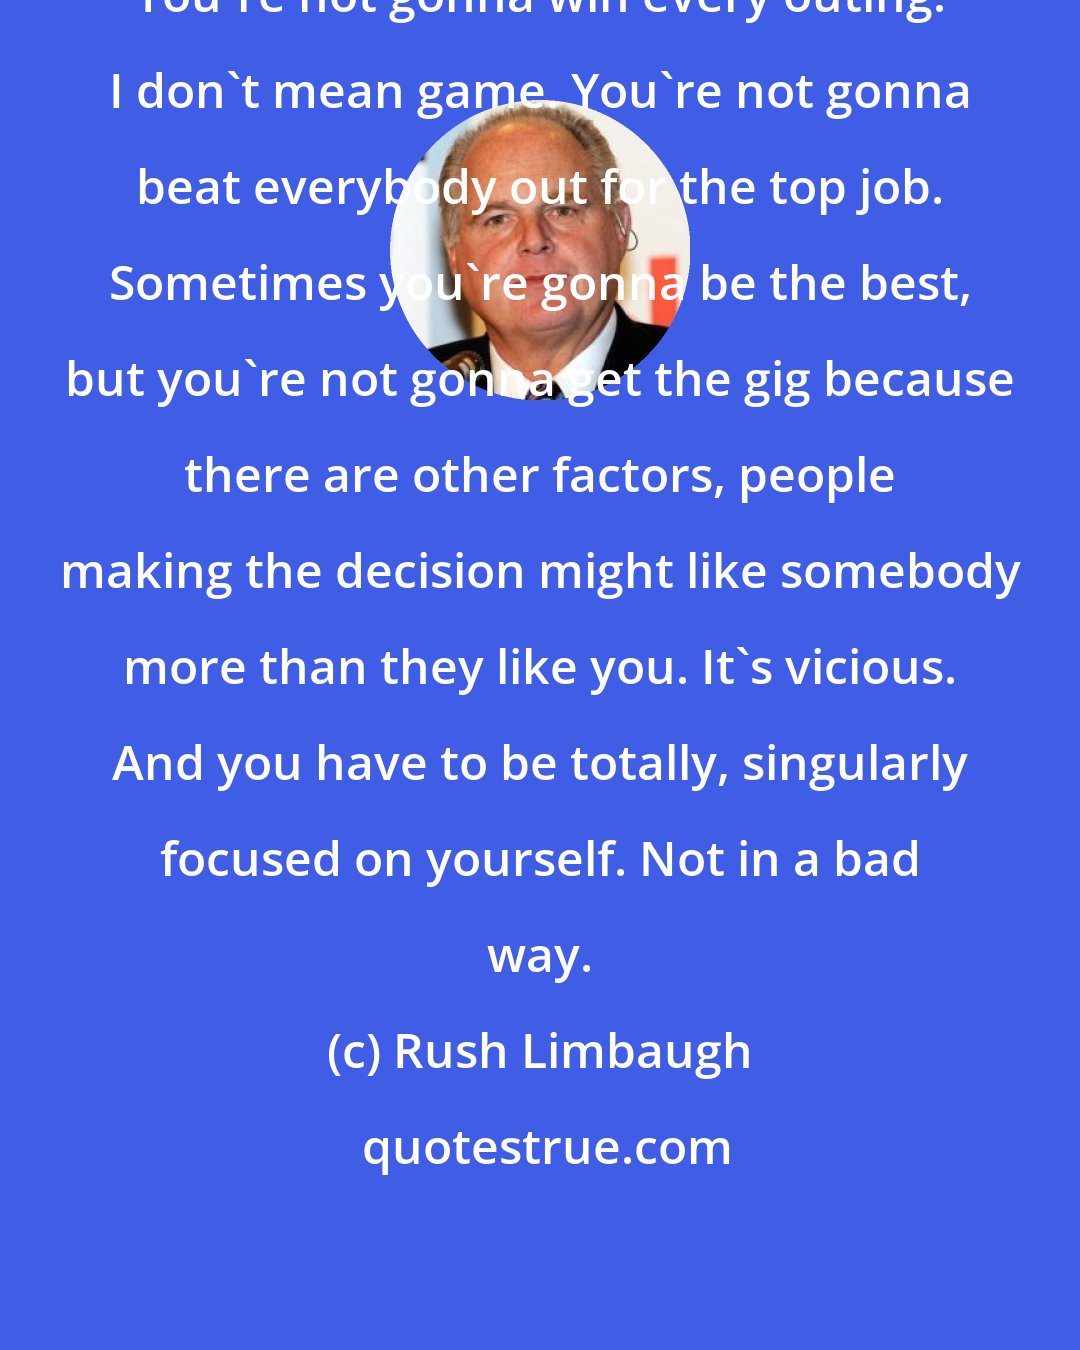 Rush Limbaugh: You're not gonna win every outing. I don't mean game. You're not gonna beat everybody out for the top job. Sometimes you're gonna be the best, but you're not gonna get the gig because there are other factors, people making the decision might like somebody more than they like you. It's vicious. And you have to be totally, singularly focused on yourself. Not in a bad way.